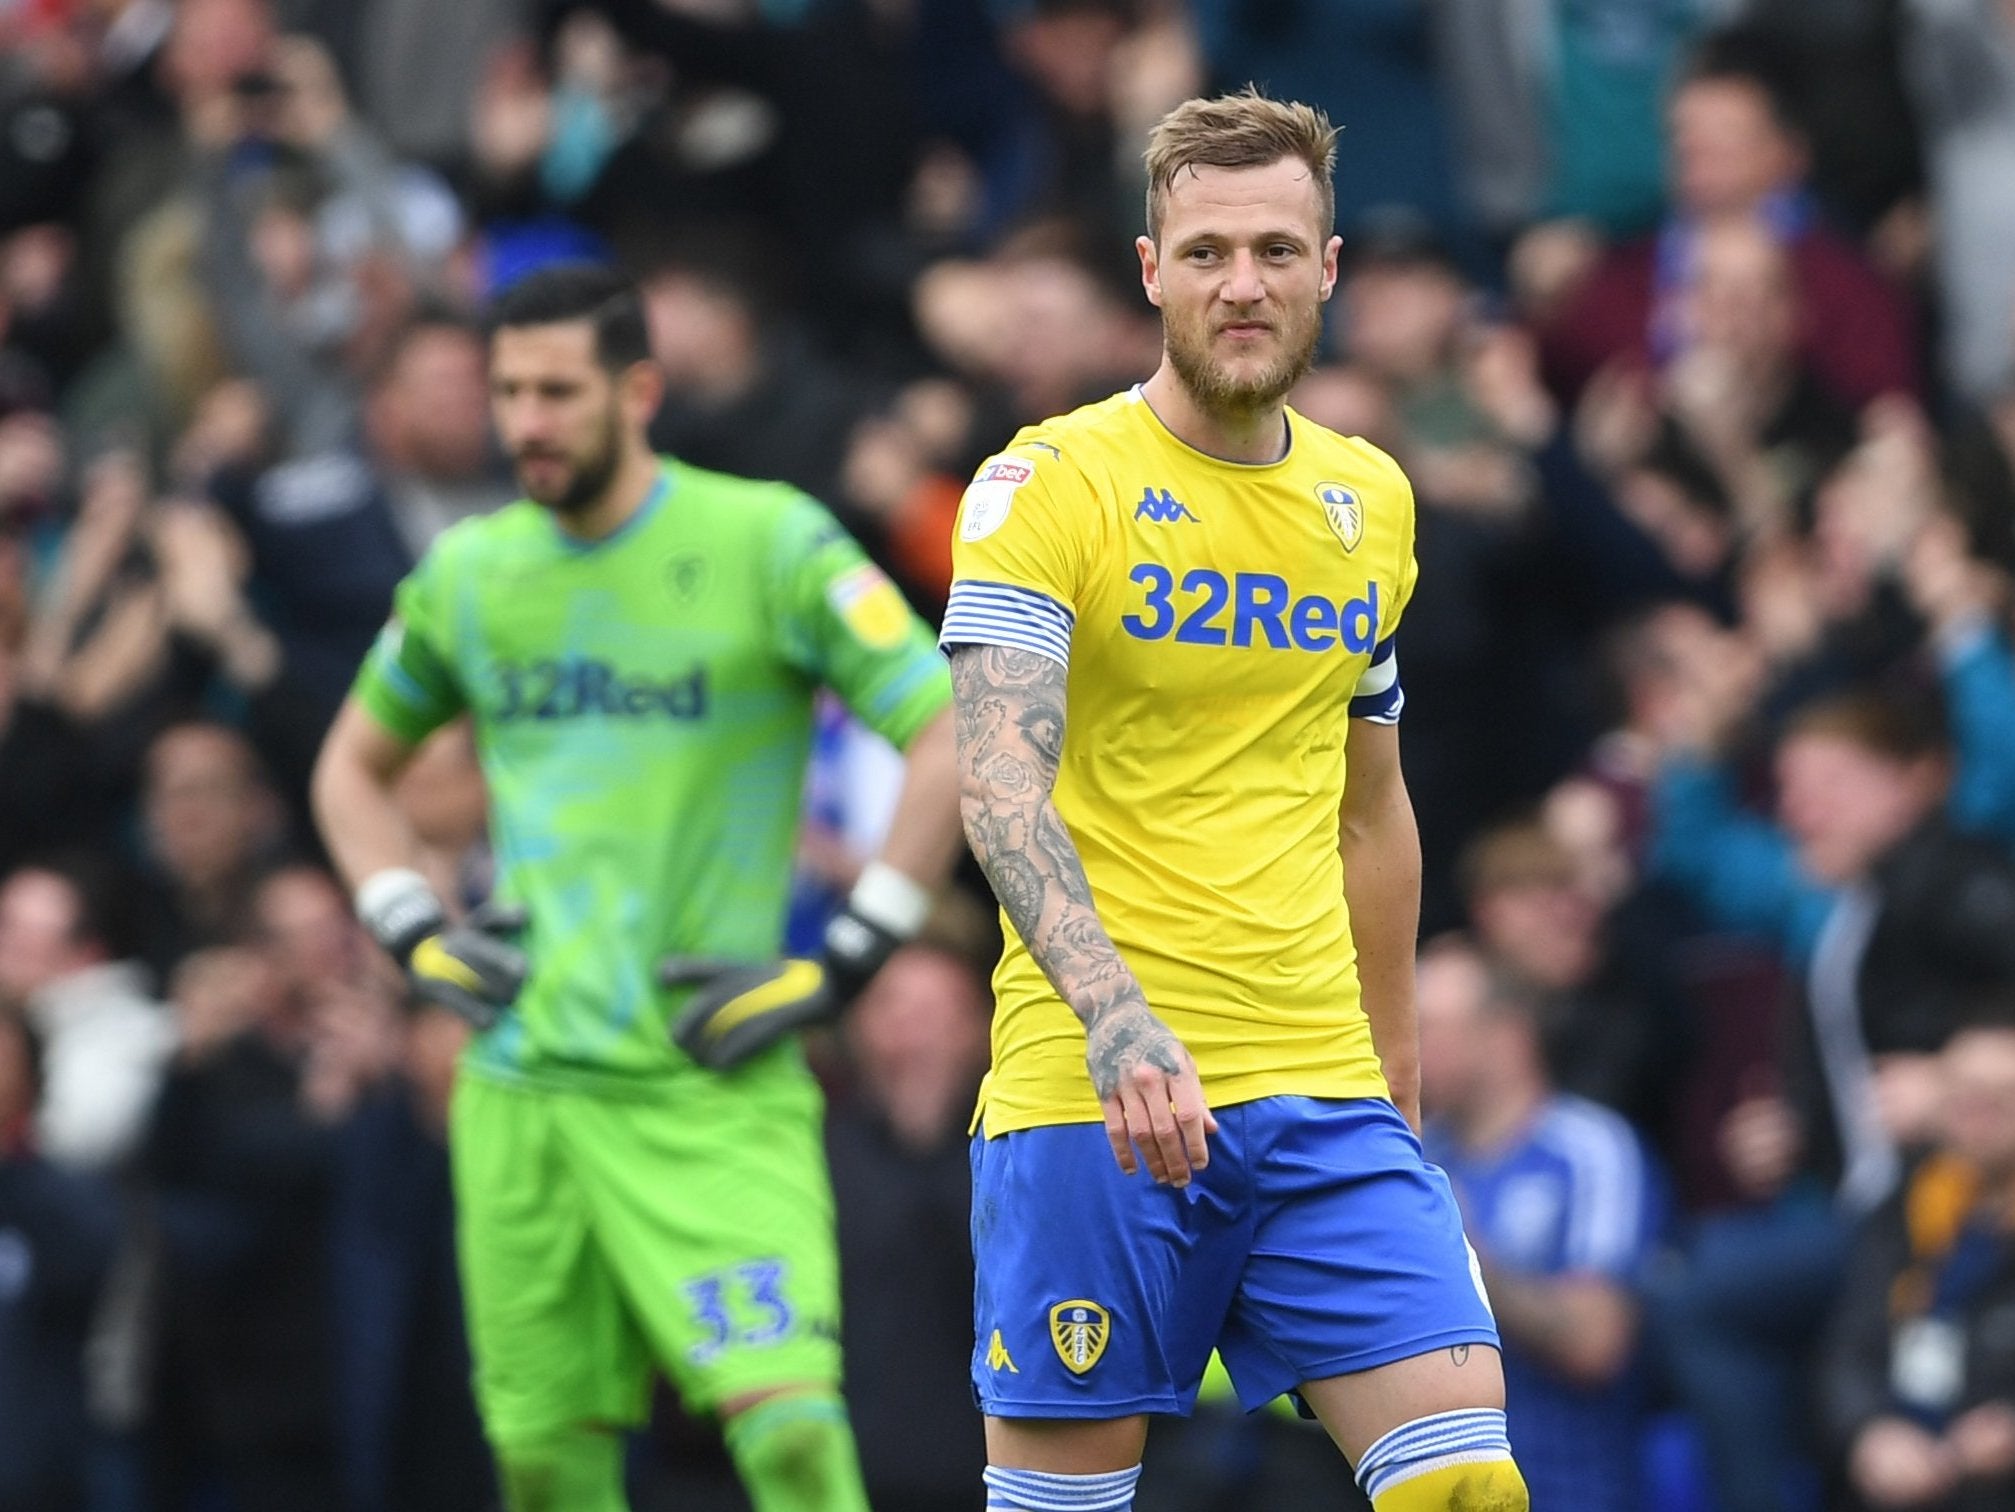 Leeds ended their season with a disappointing defeat at Ipswich